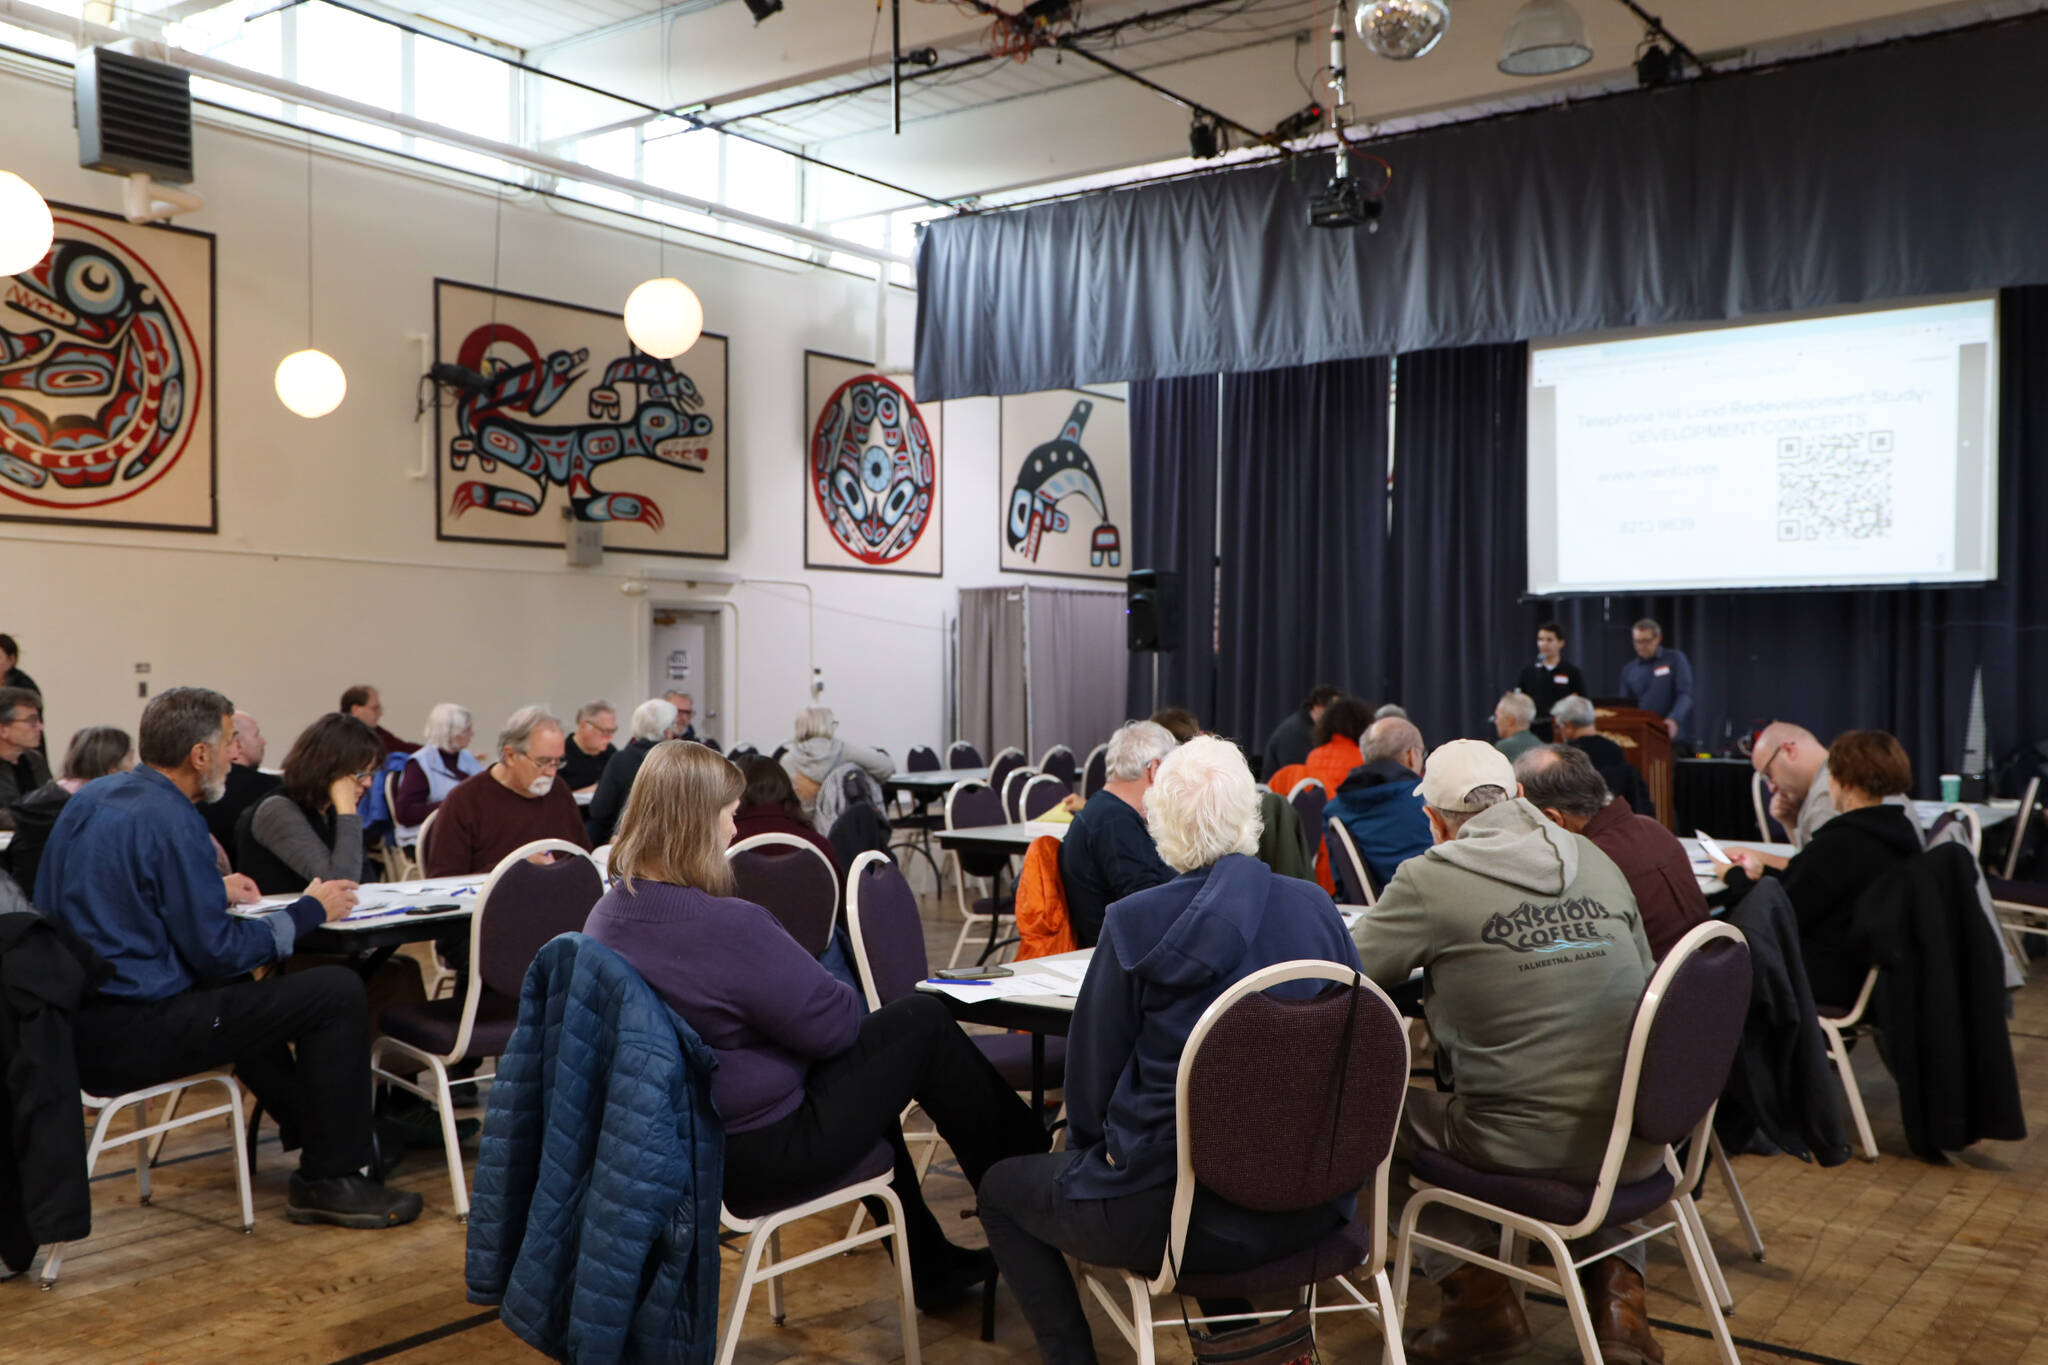 Dozens of residents packed into the Juneau Arts and Culture Center Wednesday evening during an open house to discuss Telephone Hill developments. (Clarise Larson / Juneau Empire)